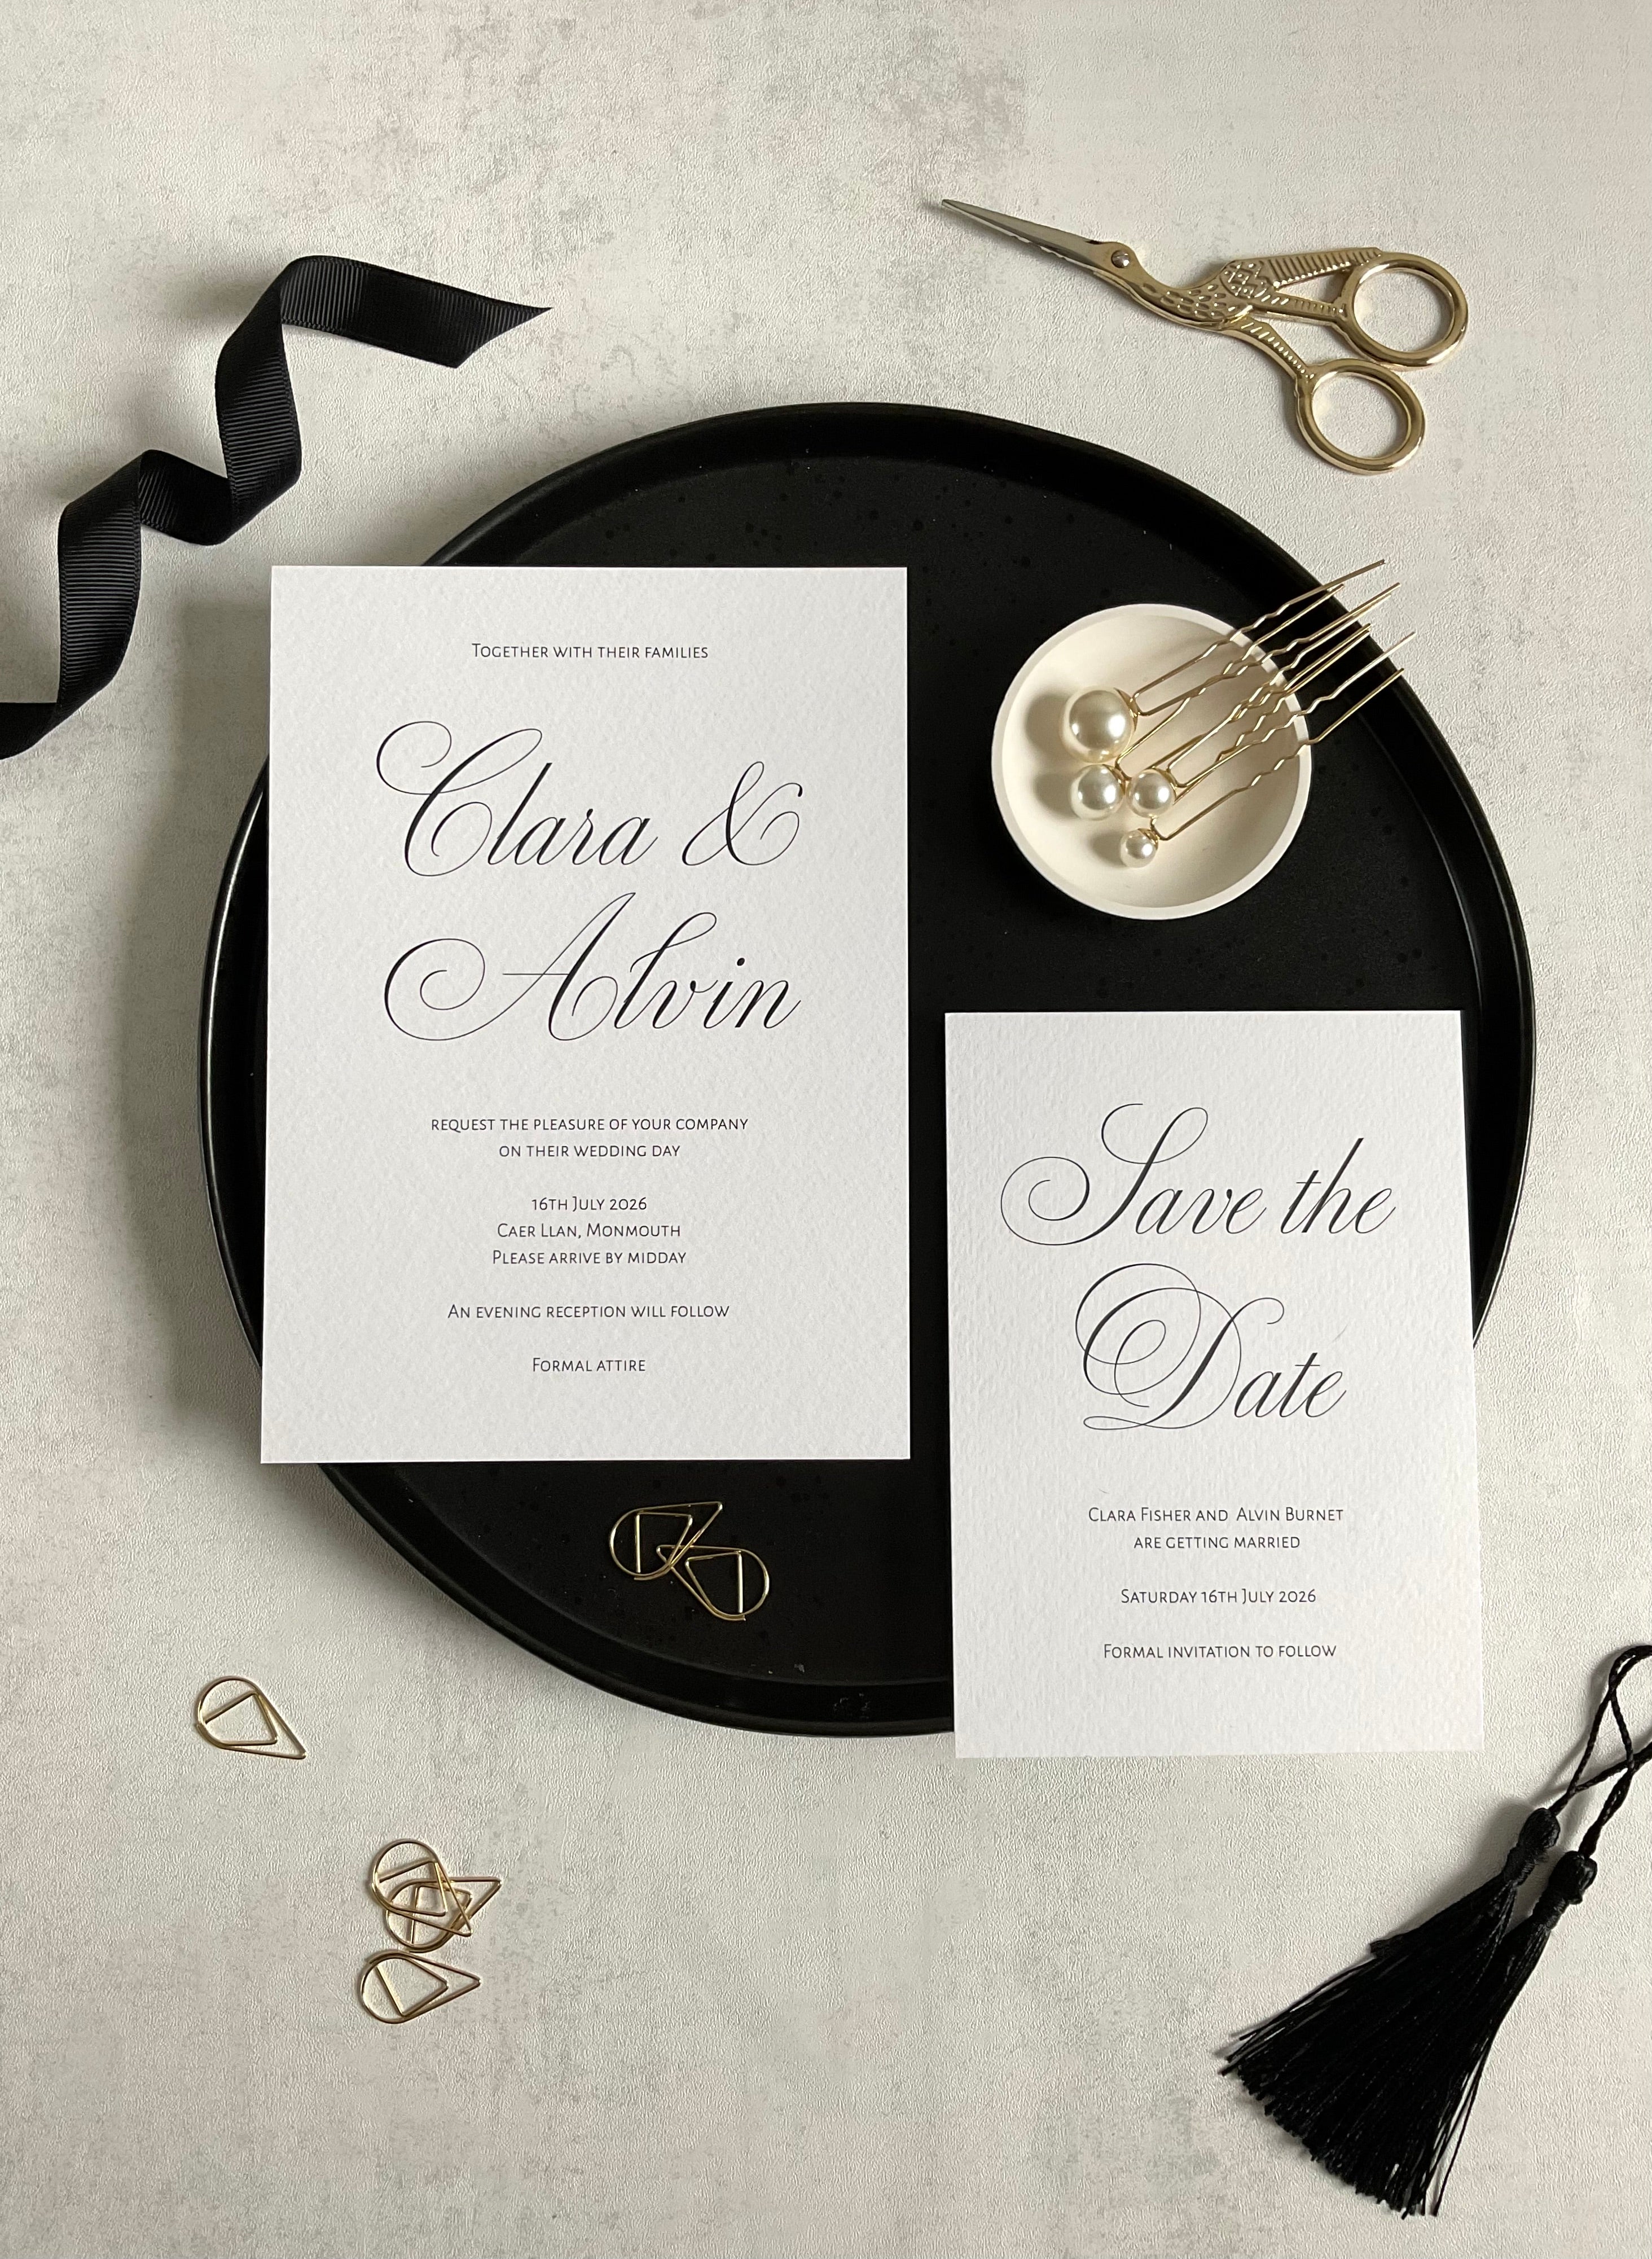 Black and white wedding invitation and save the date card, pictured on a black charger plate to contract the white invitation. Titles have calligraphic font and the rest of the type is sans serif.